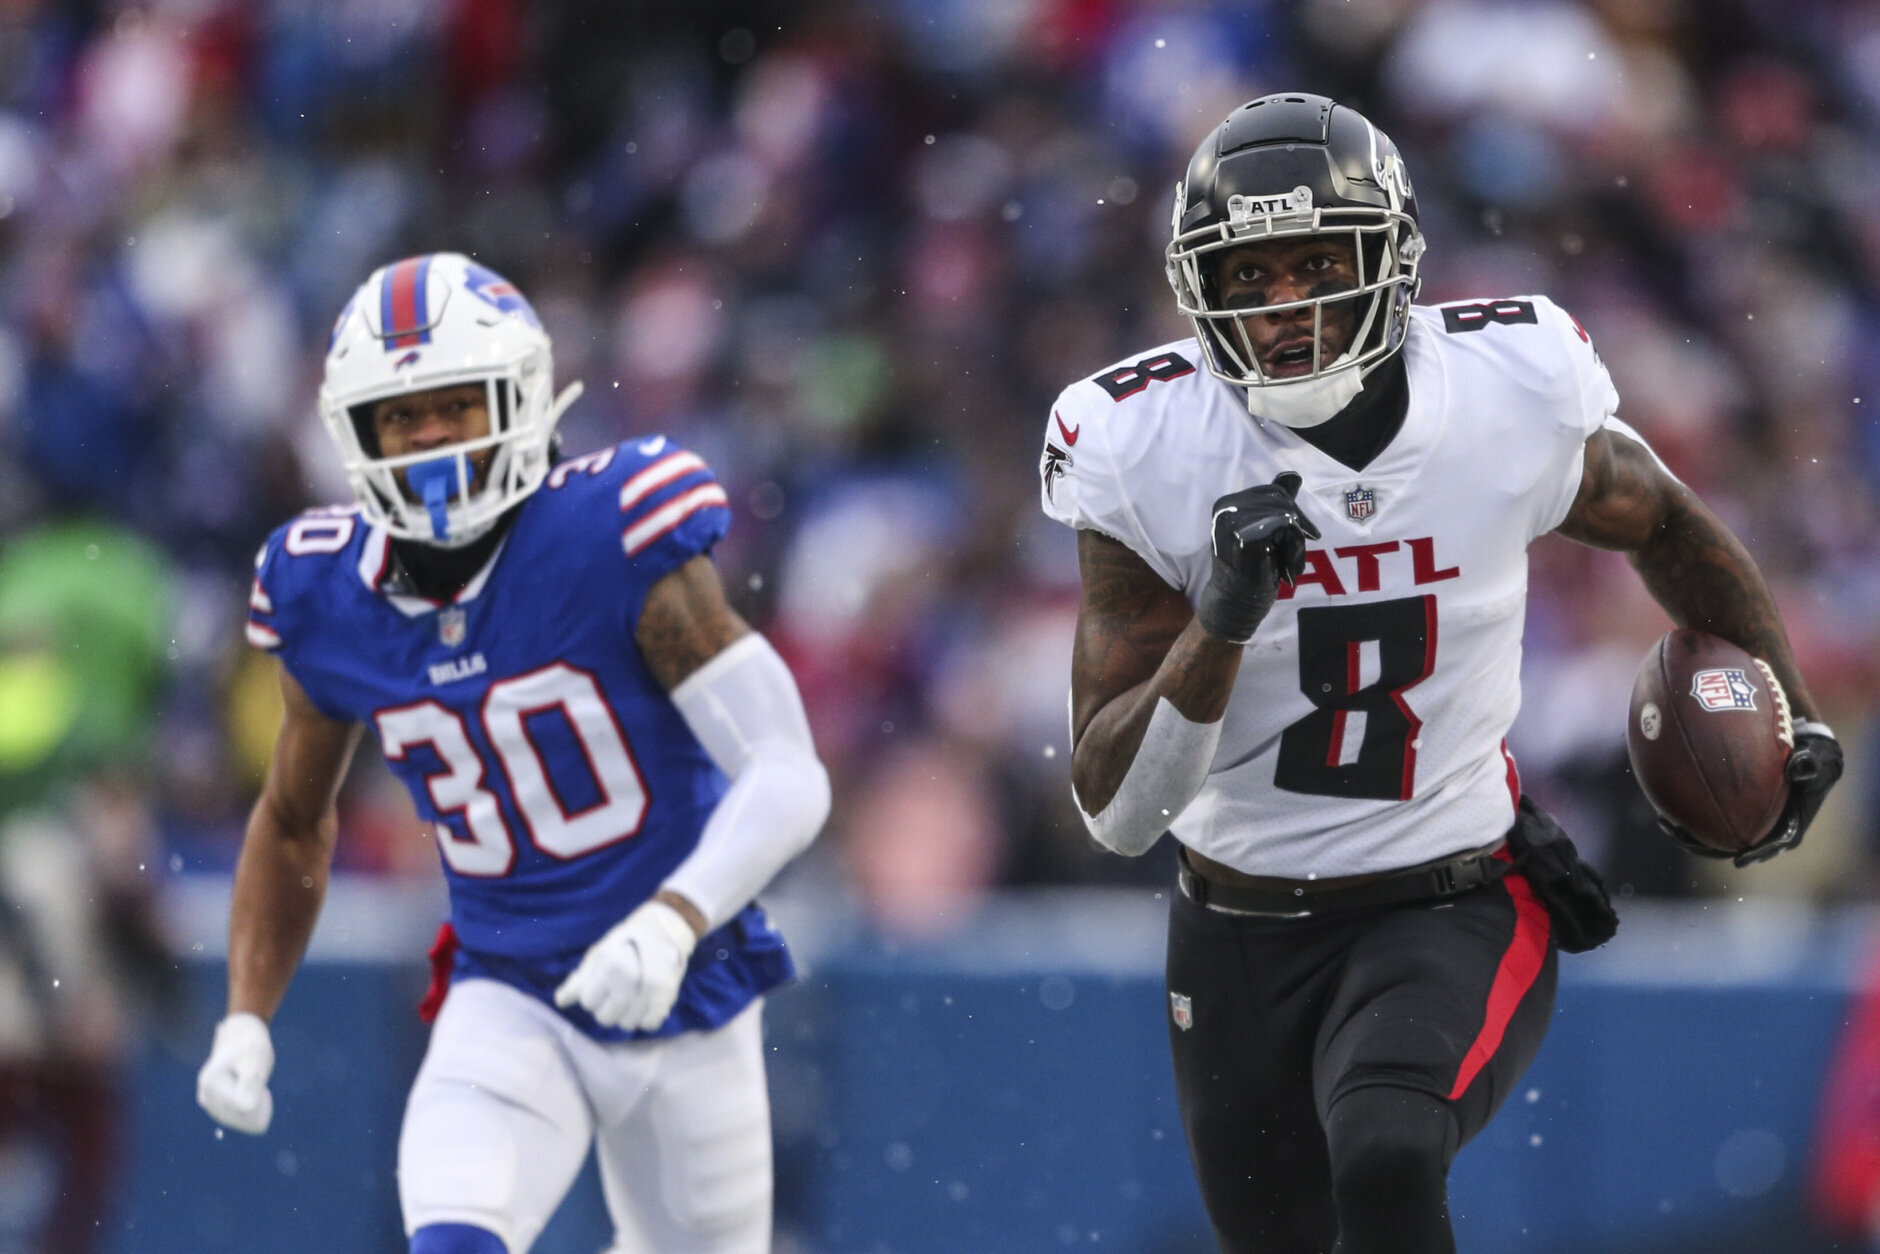 <p><em><strong>Falcons 15</strong></em><br />
<em><strong>Bills 29</strong></em></p>
<p>Regardless of who plays QB in Atlanta, we know who the top target is for the foreseeable future: Kyle Pitts is the second rookie tight end in NFL history — joining Hall of Famer Mike Ditka — to notch 1,000 receiving yards in a season and will only get better in 2022, if healthy.</p>
<p>Buffalo, meanwhile, is a home win over the Jets away from back-to-back AFC East titles. Though the Bills have already clinched a playoff berth, they don&#8217;t deserve one if they can&#8217;t handle Gang Green.</p>
